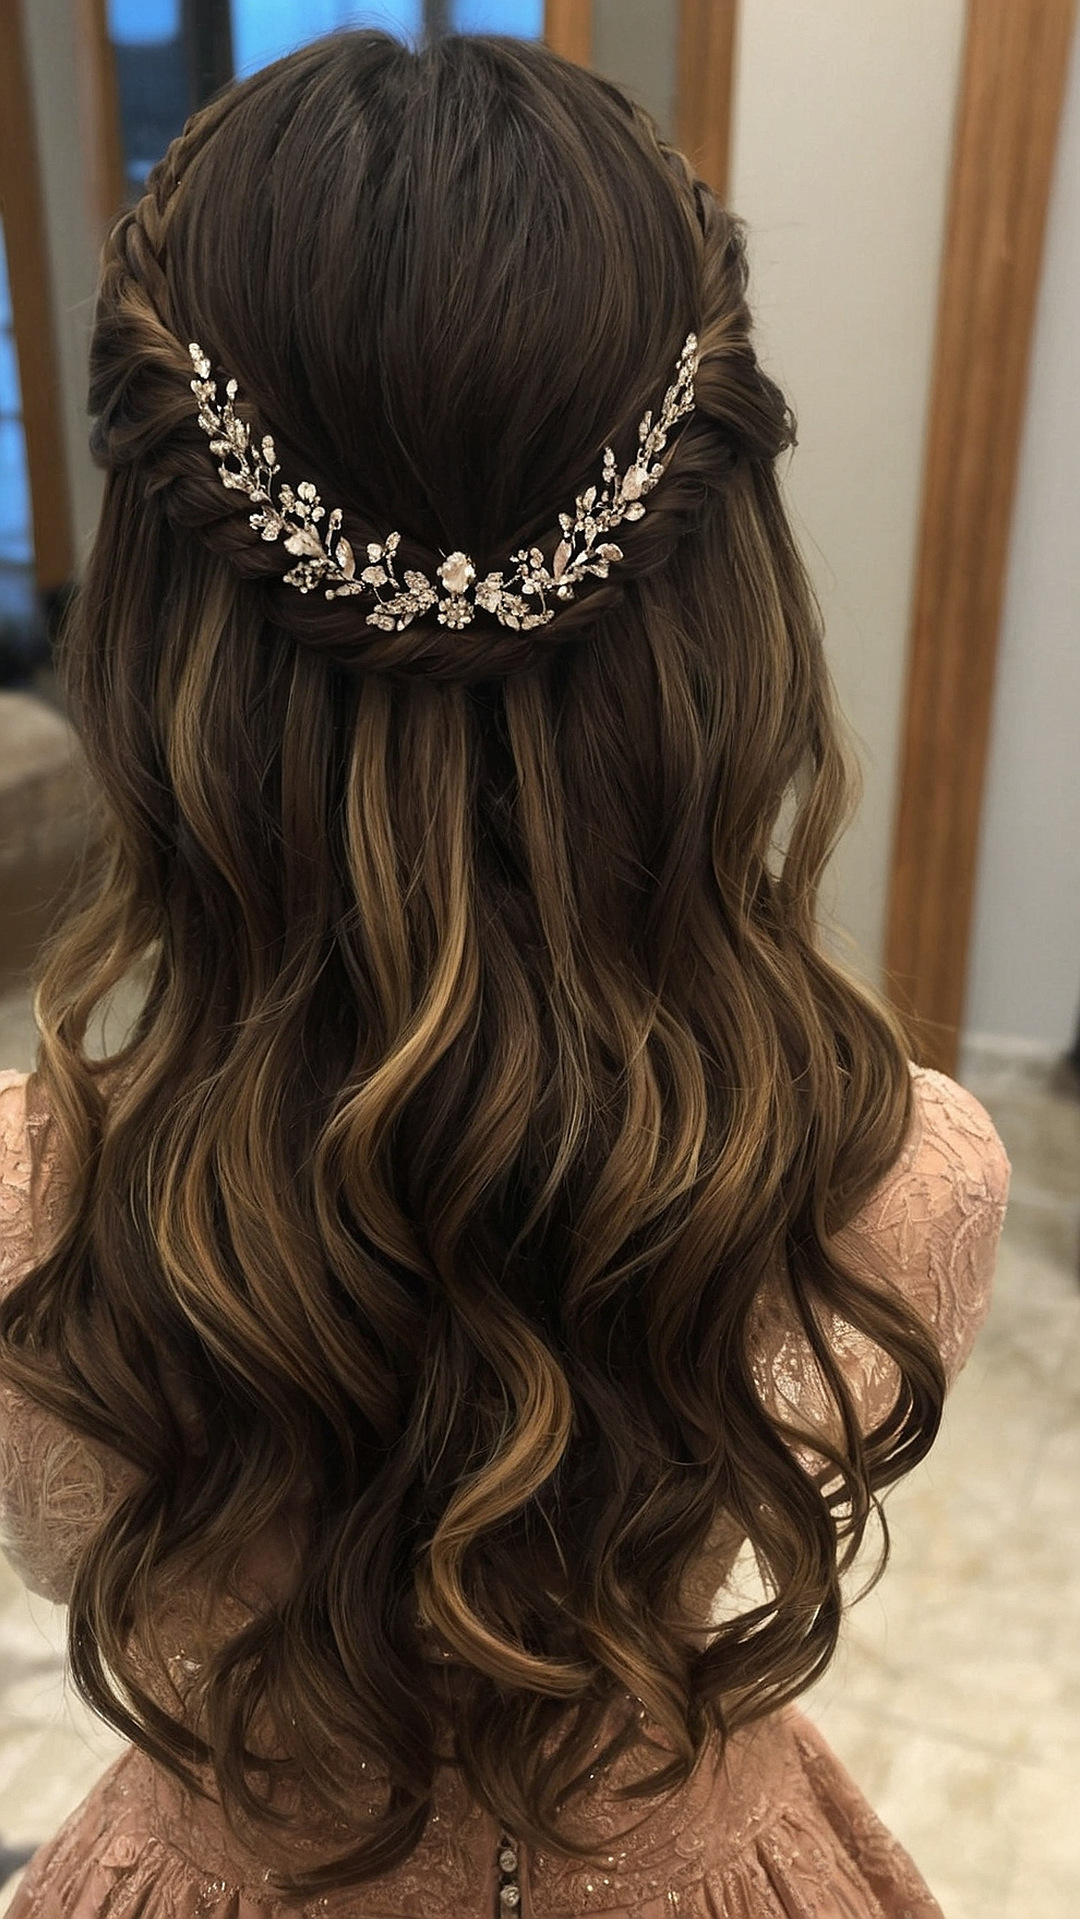 Prom Queens: Top 10 Cute Hairstyles with Tiaras